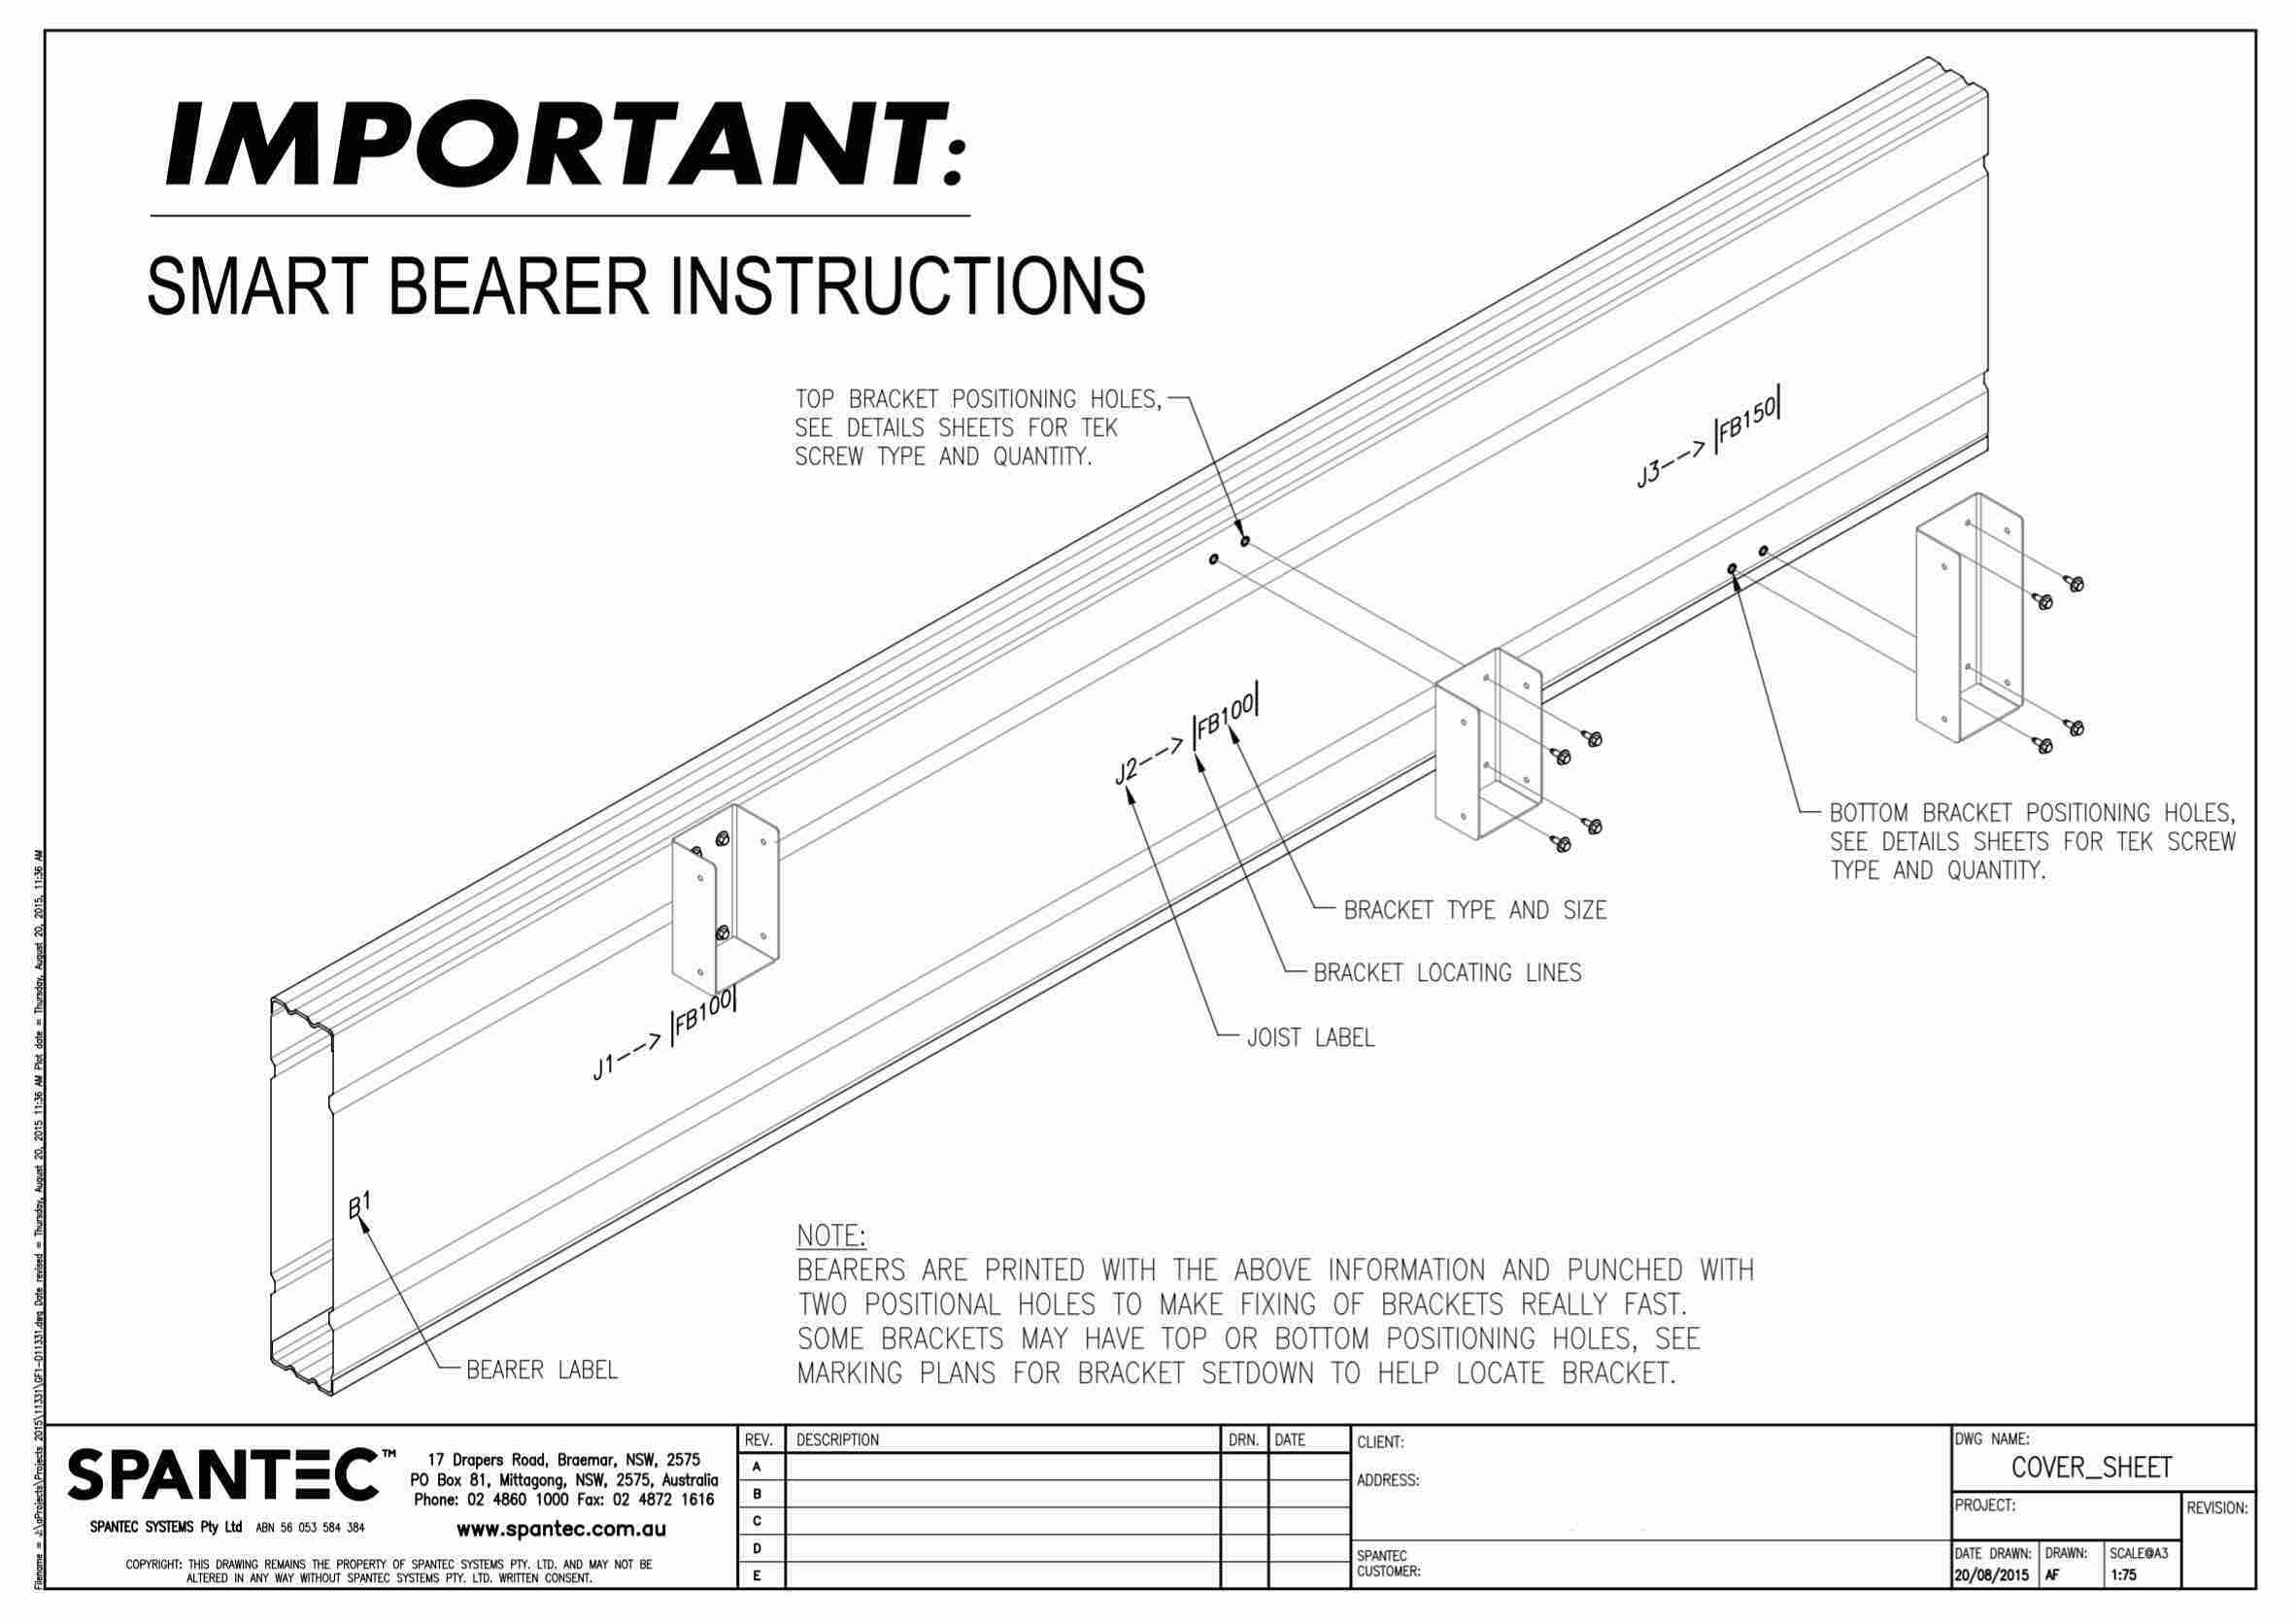 A drawing of a Boxspan smart bearer, pre-punched holes at bracket locations where steeljoists slot in, and bracket connection example.